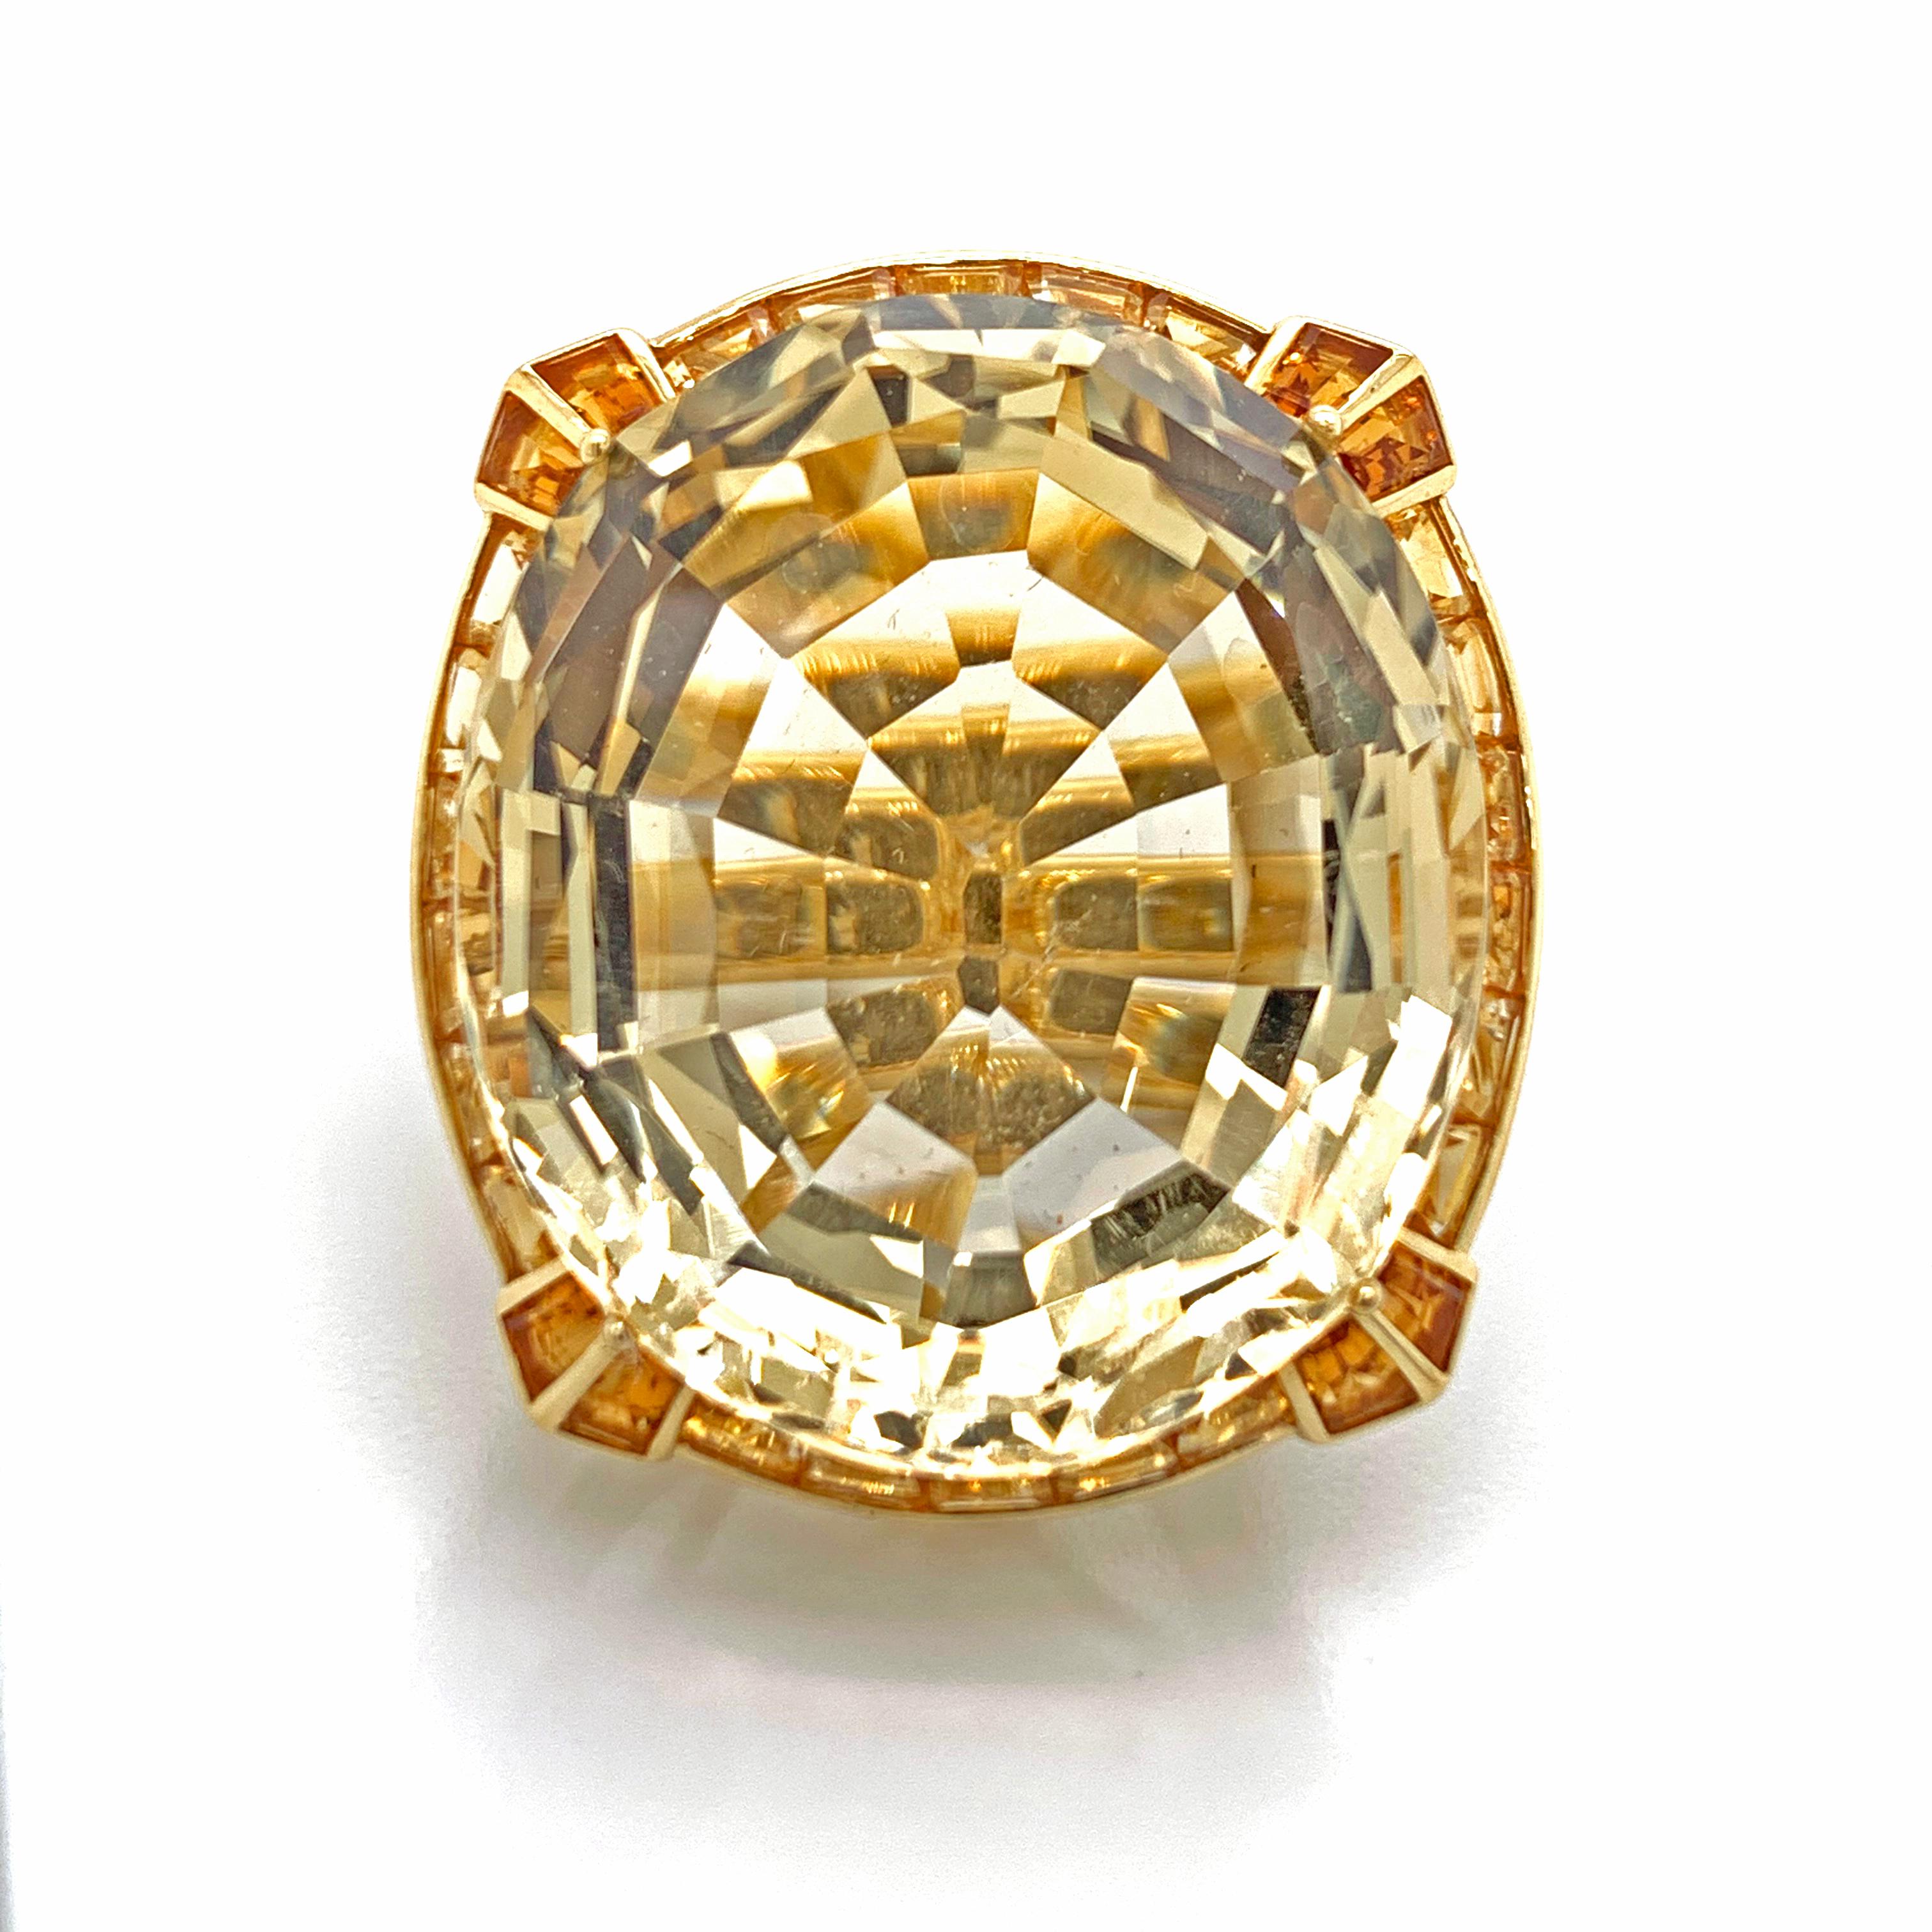 A, beautiful 18kt yellow gold ring. With, a beautiful Citrine center stone and with round small diamond going around the mounting of the ring. The ring also features Citrines on the side of the ring and complimenting the center stone. The, ring is